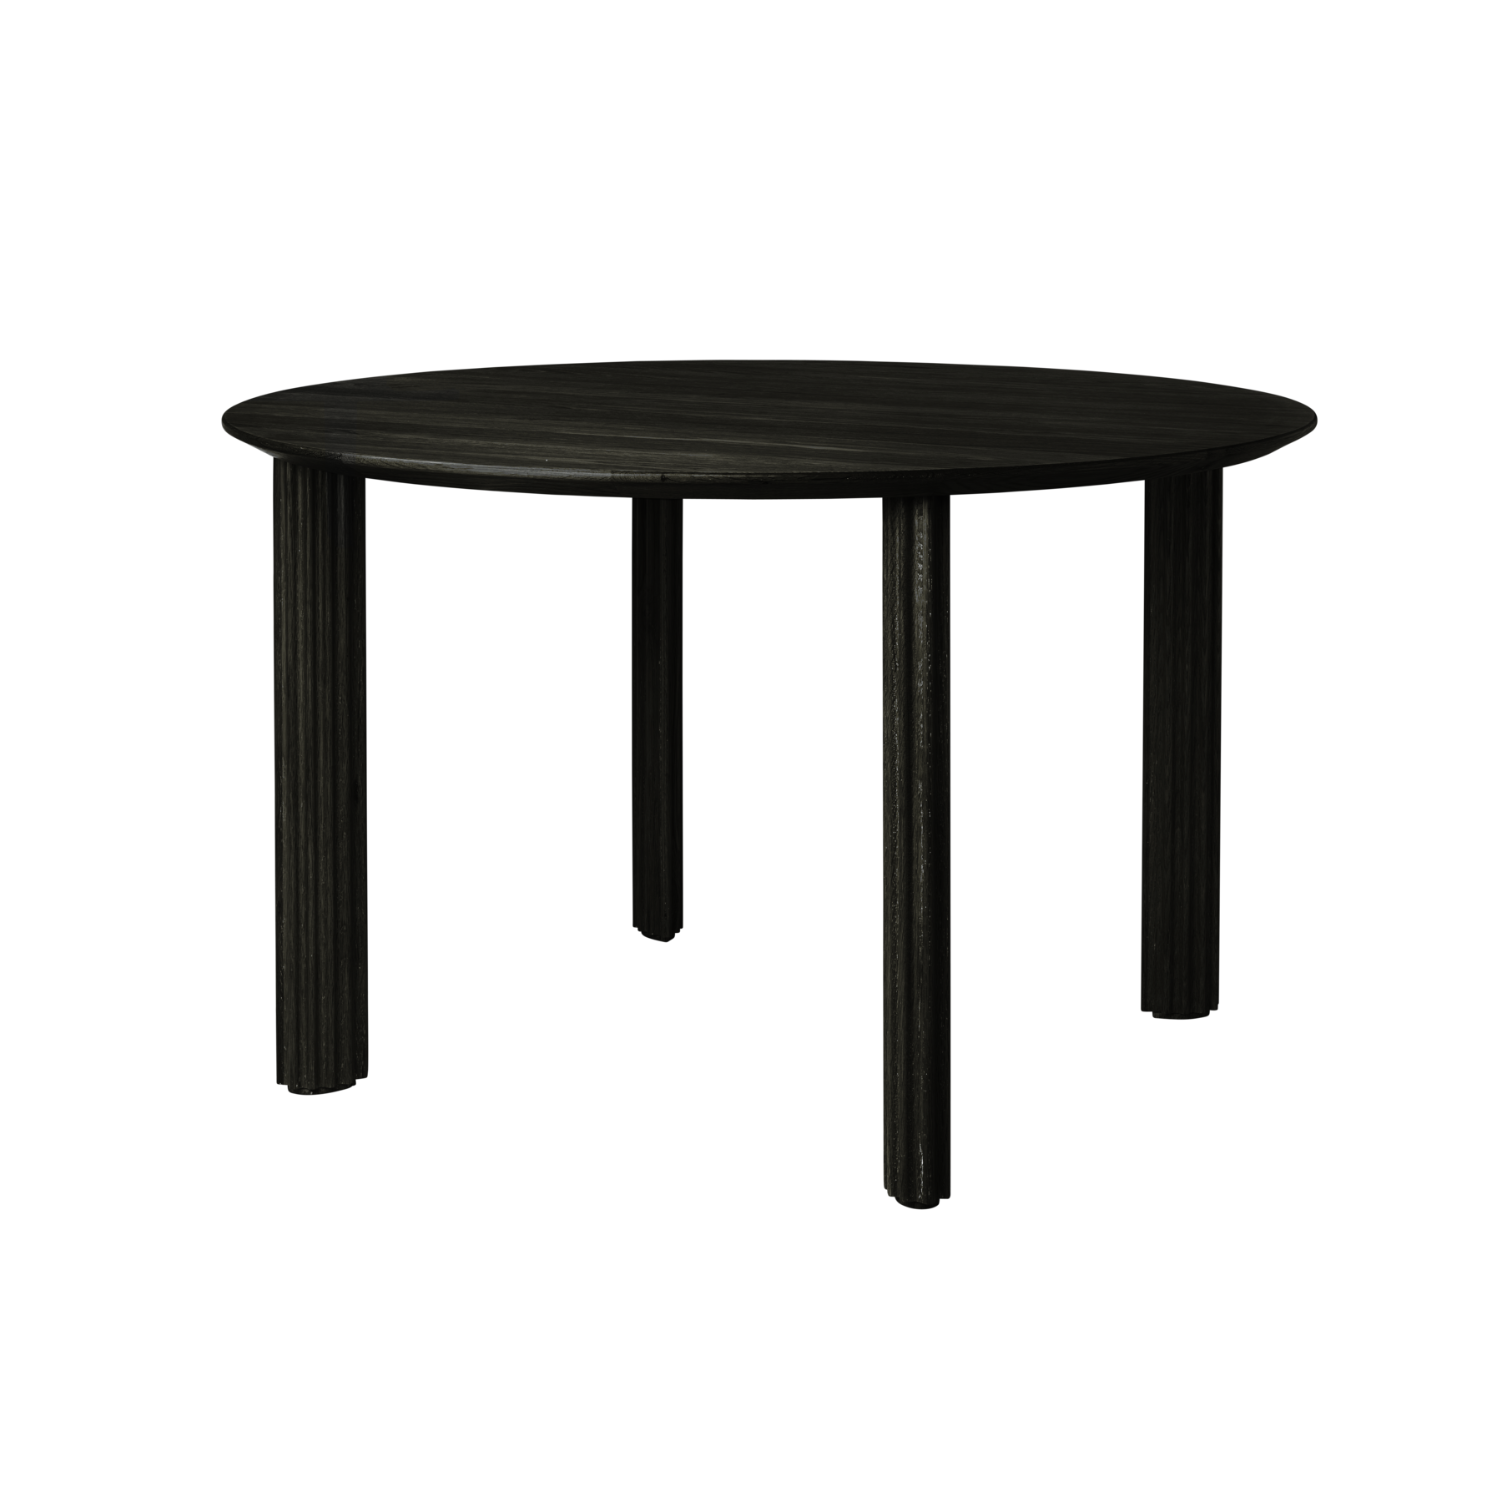 COMFORT CIRCLE - Dining Table